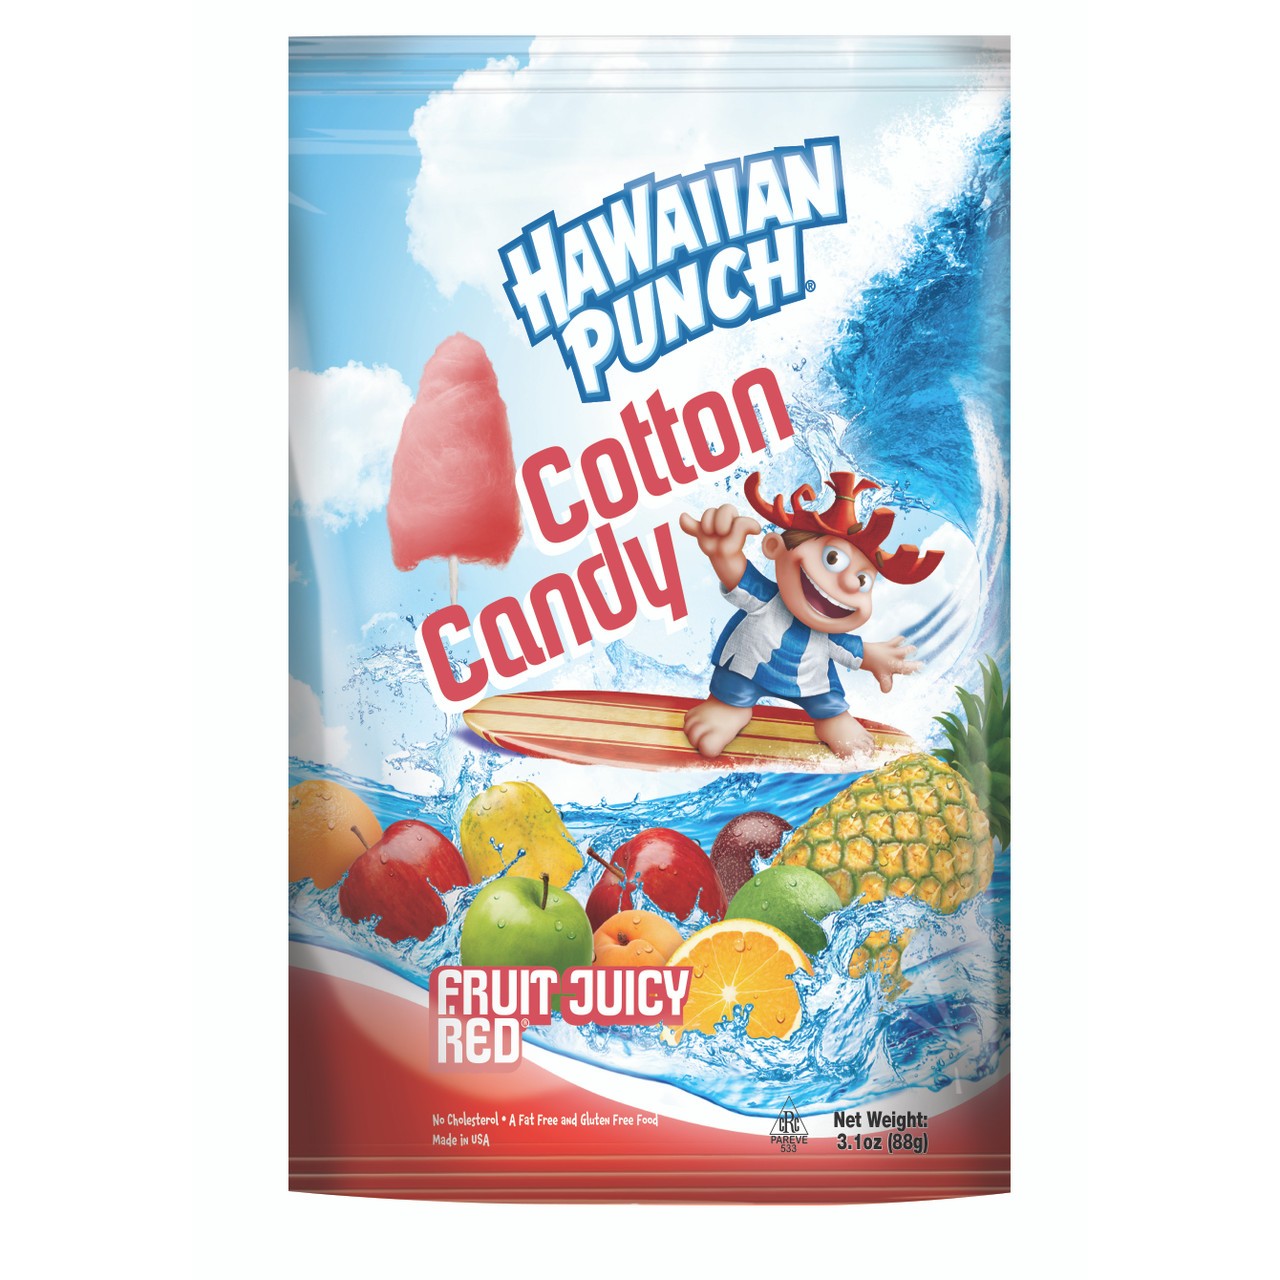 Charms Fluffy Stuff Watermelon Flavored Cotton Candy - 2.1 oz